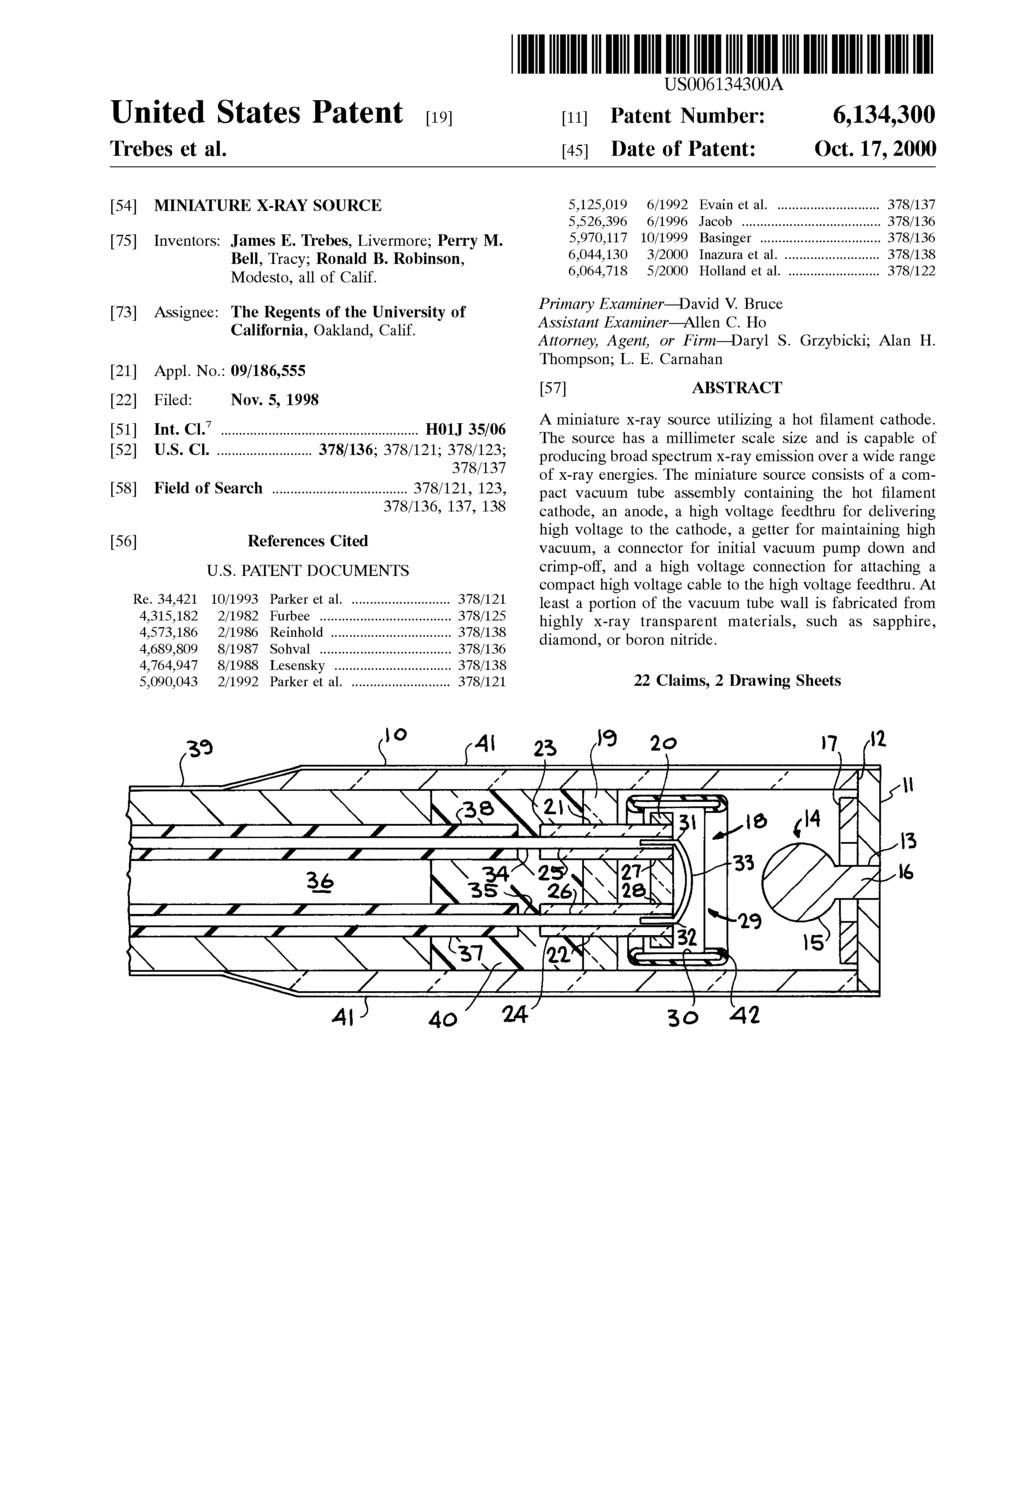 United States Patent (19) Trebes et al. 54 MINIATURE X-RAY SOURCE 75 Inventors: James E. Trebes, Livermore; Perry M. Bell, Tracy; Ronald B. Robinson, Modesto, all of Calif.